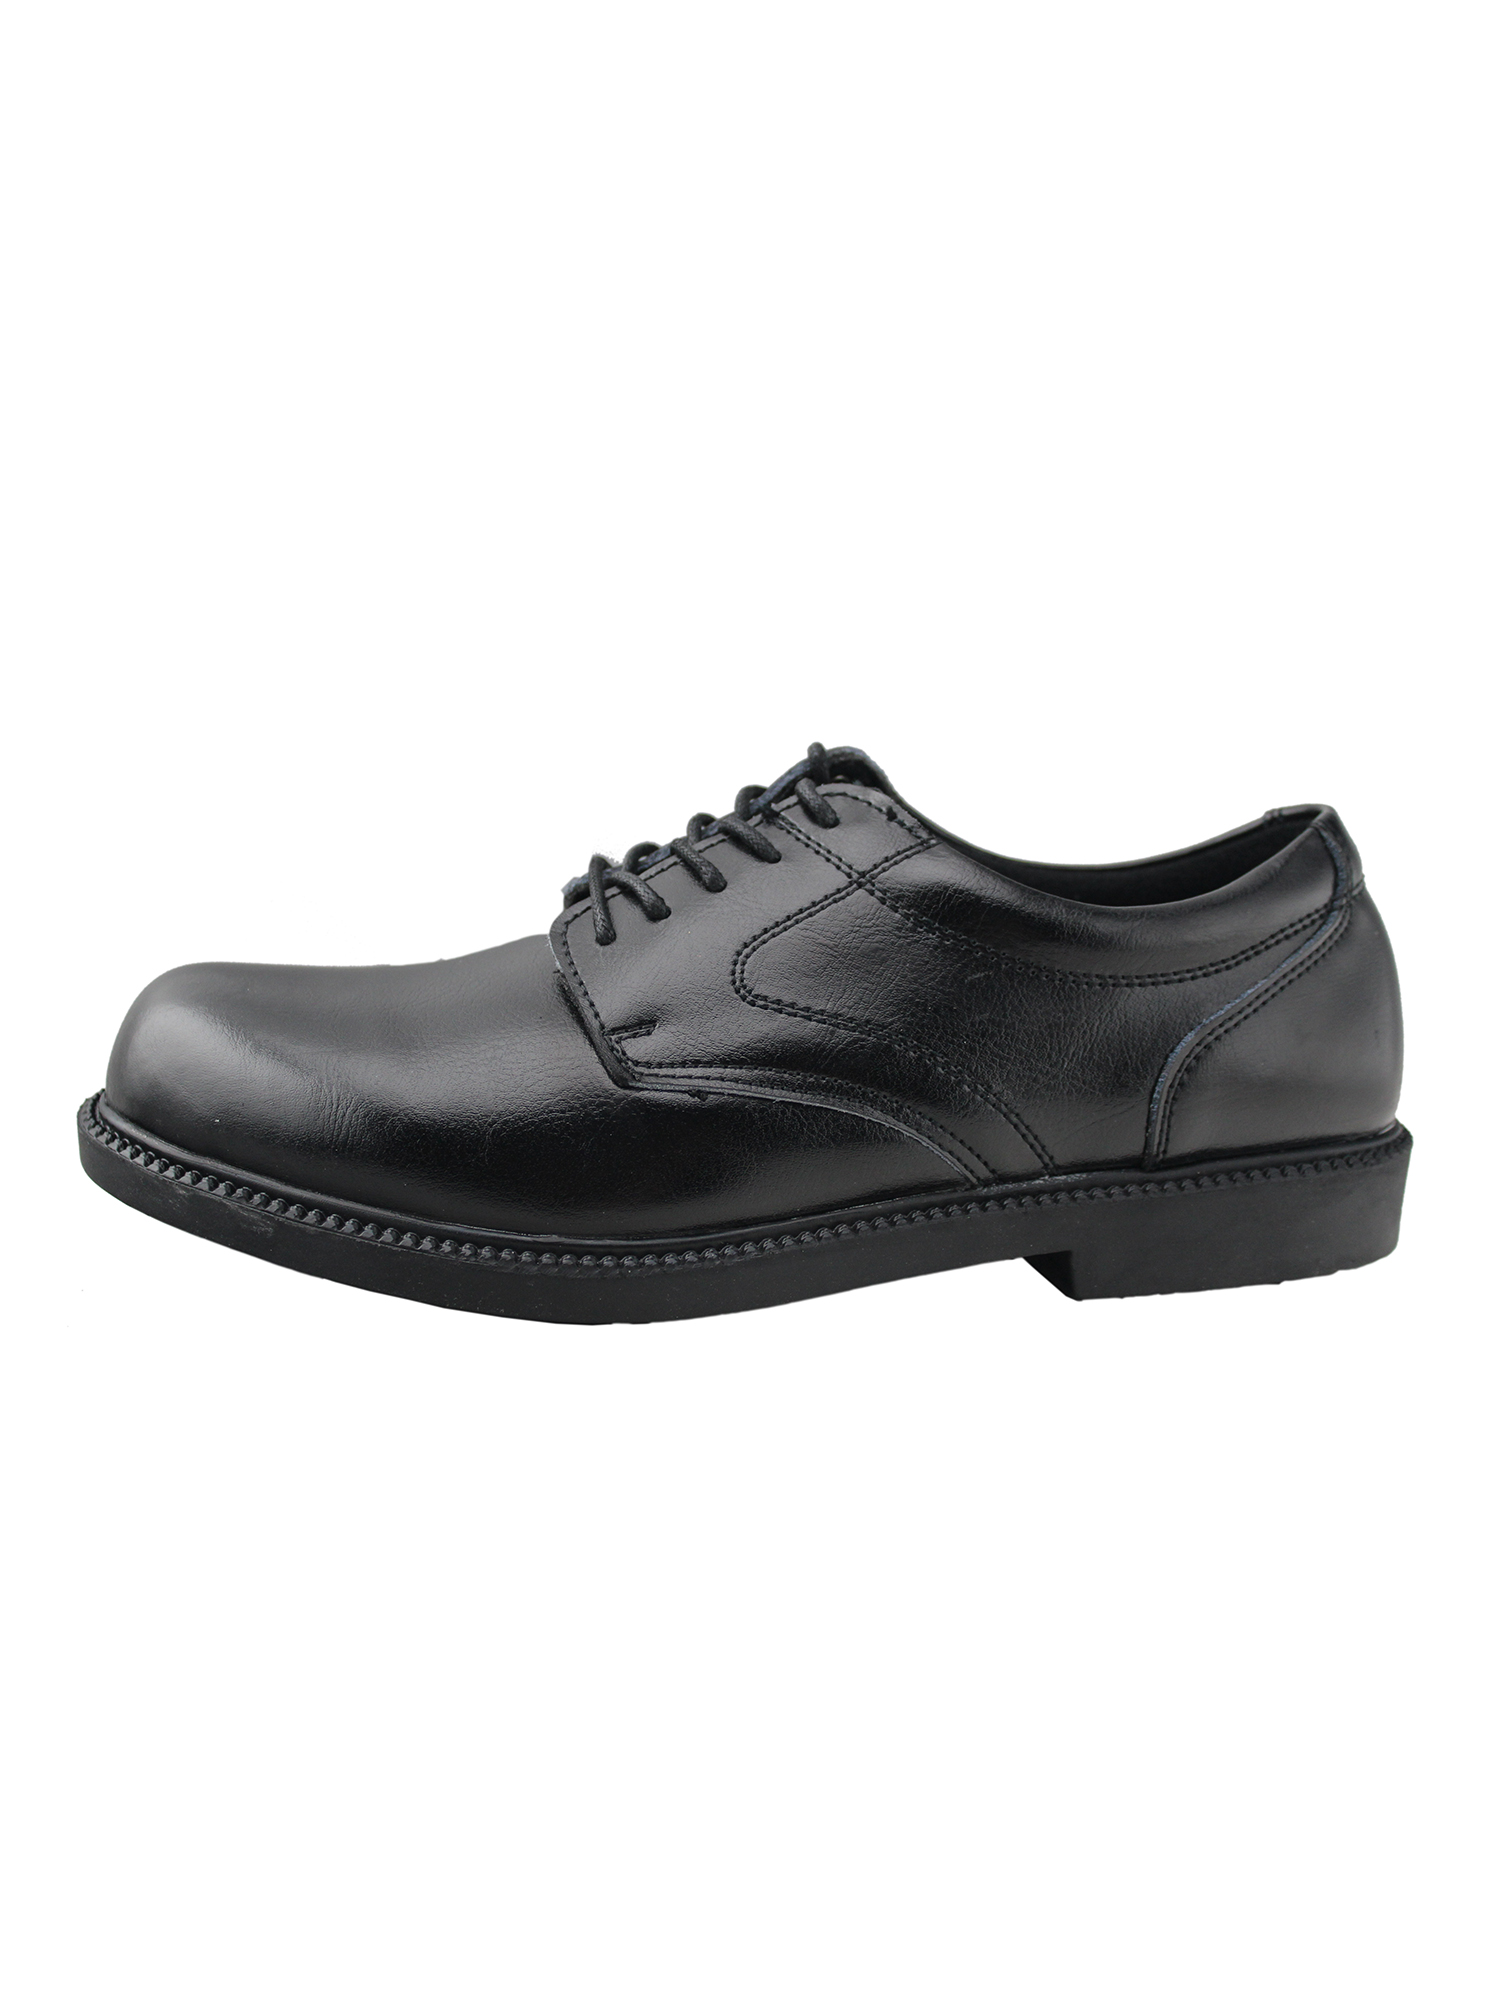 Mens Oxford Leather Shoes Comfortable Black Lace Up Slip and Oil Resistant Shoes - image 2 of 5